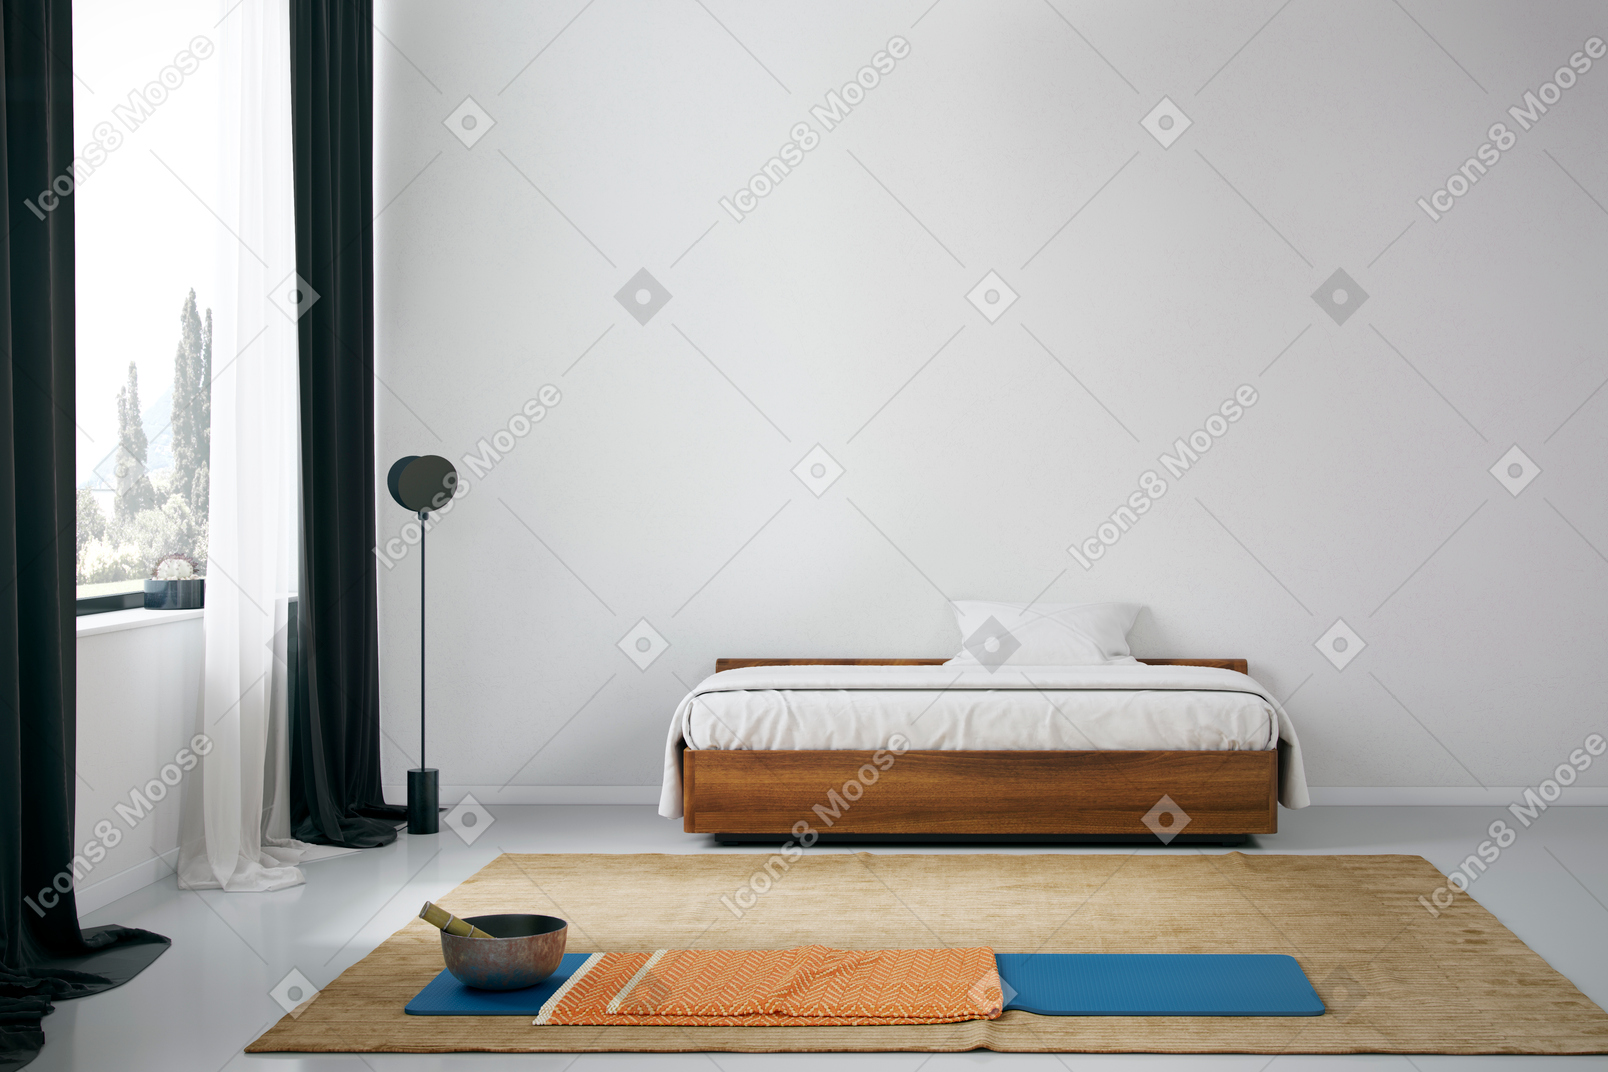 Minimalistic bedroom with exercise mat and mortar and pestle